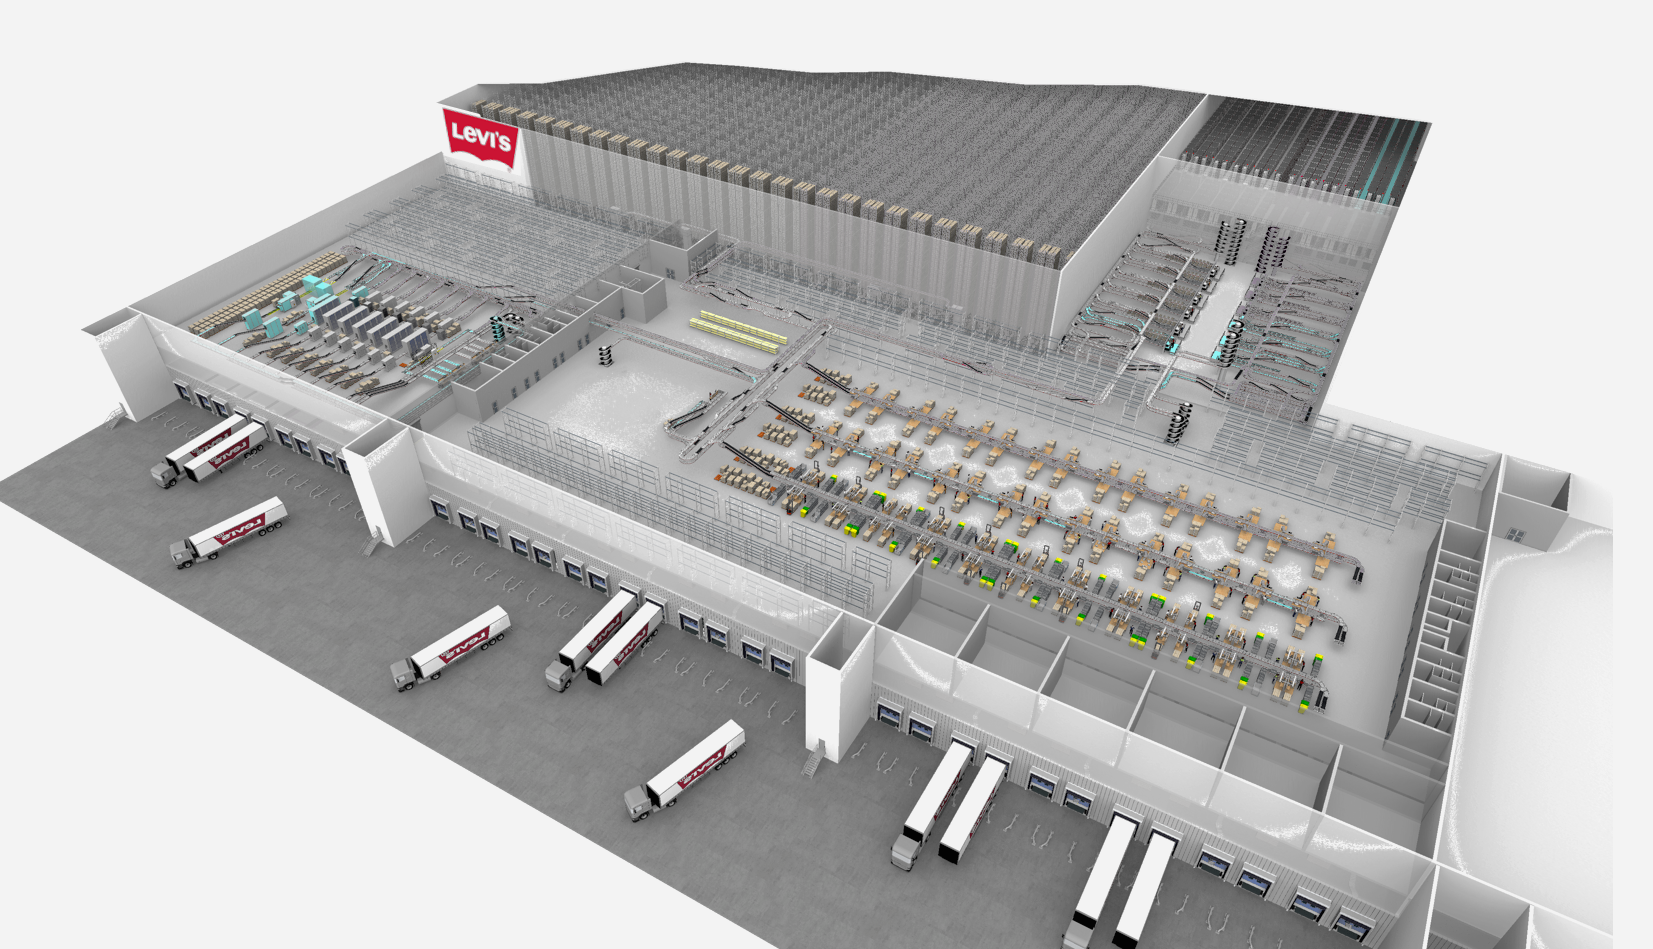 Levi Strauss & Co. appoints TGW to design and implement European  distribution center - Modern Materials Handling